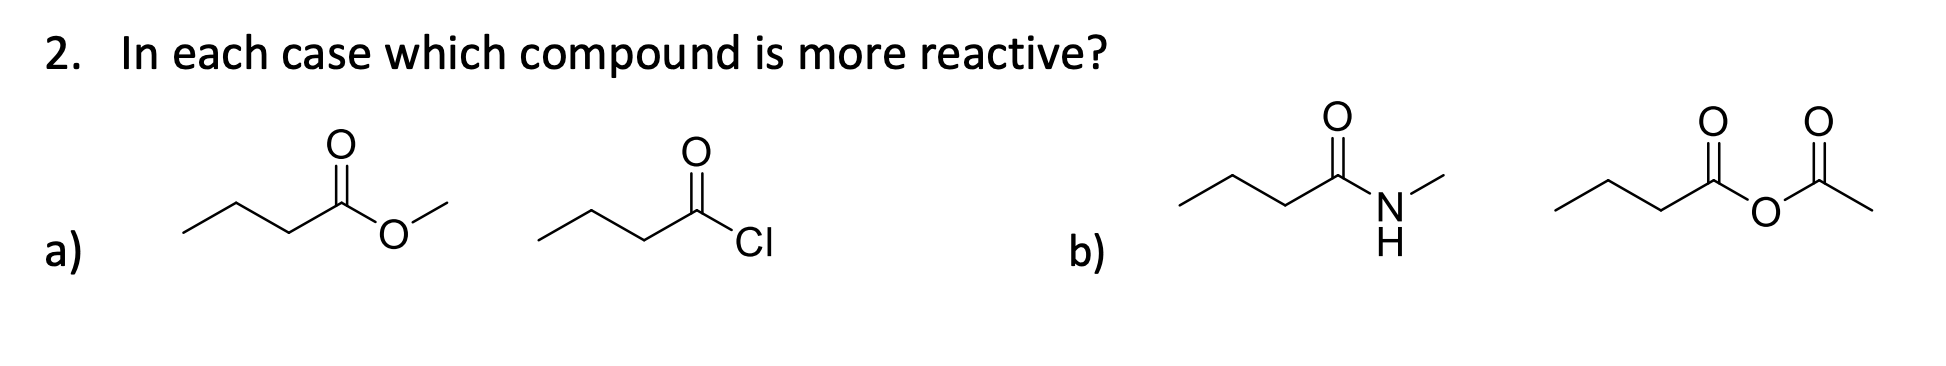 2. In each case which compound is more reactive?
a)
b)